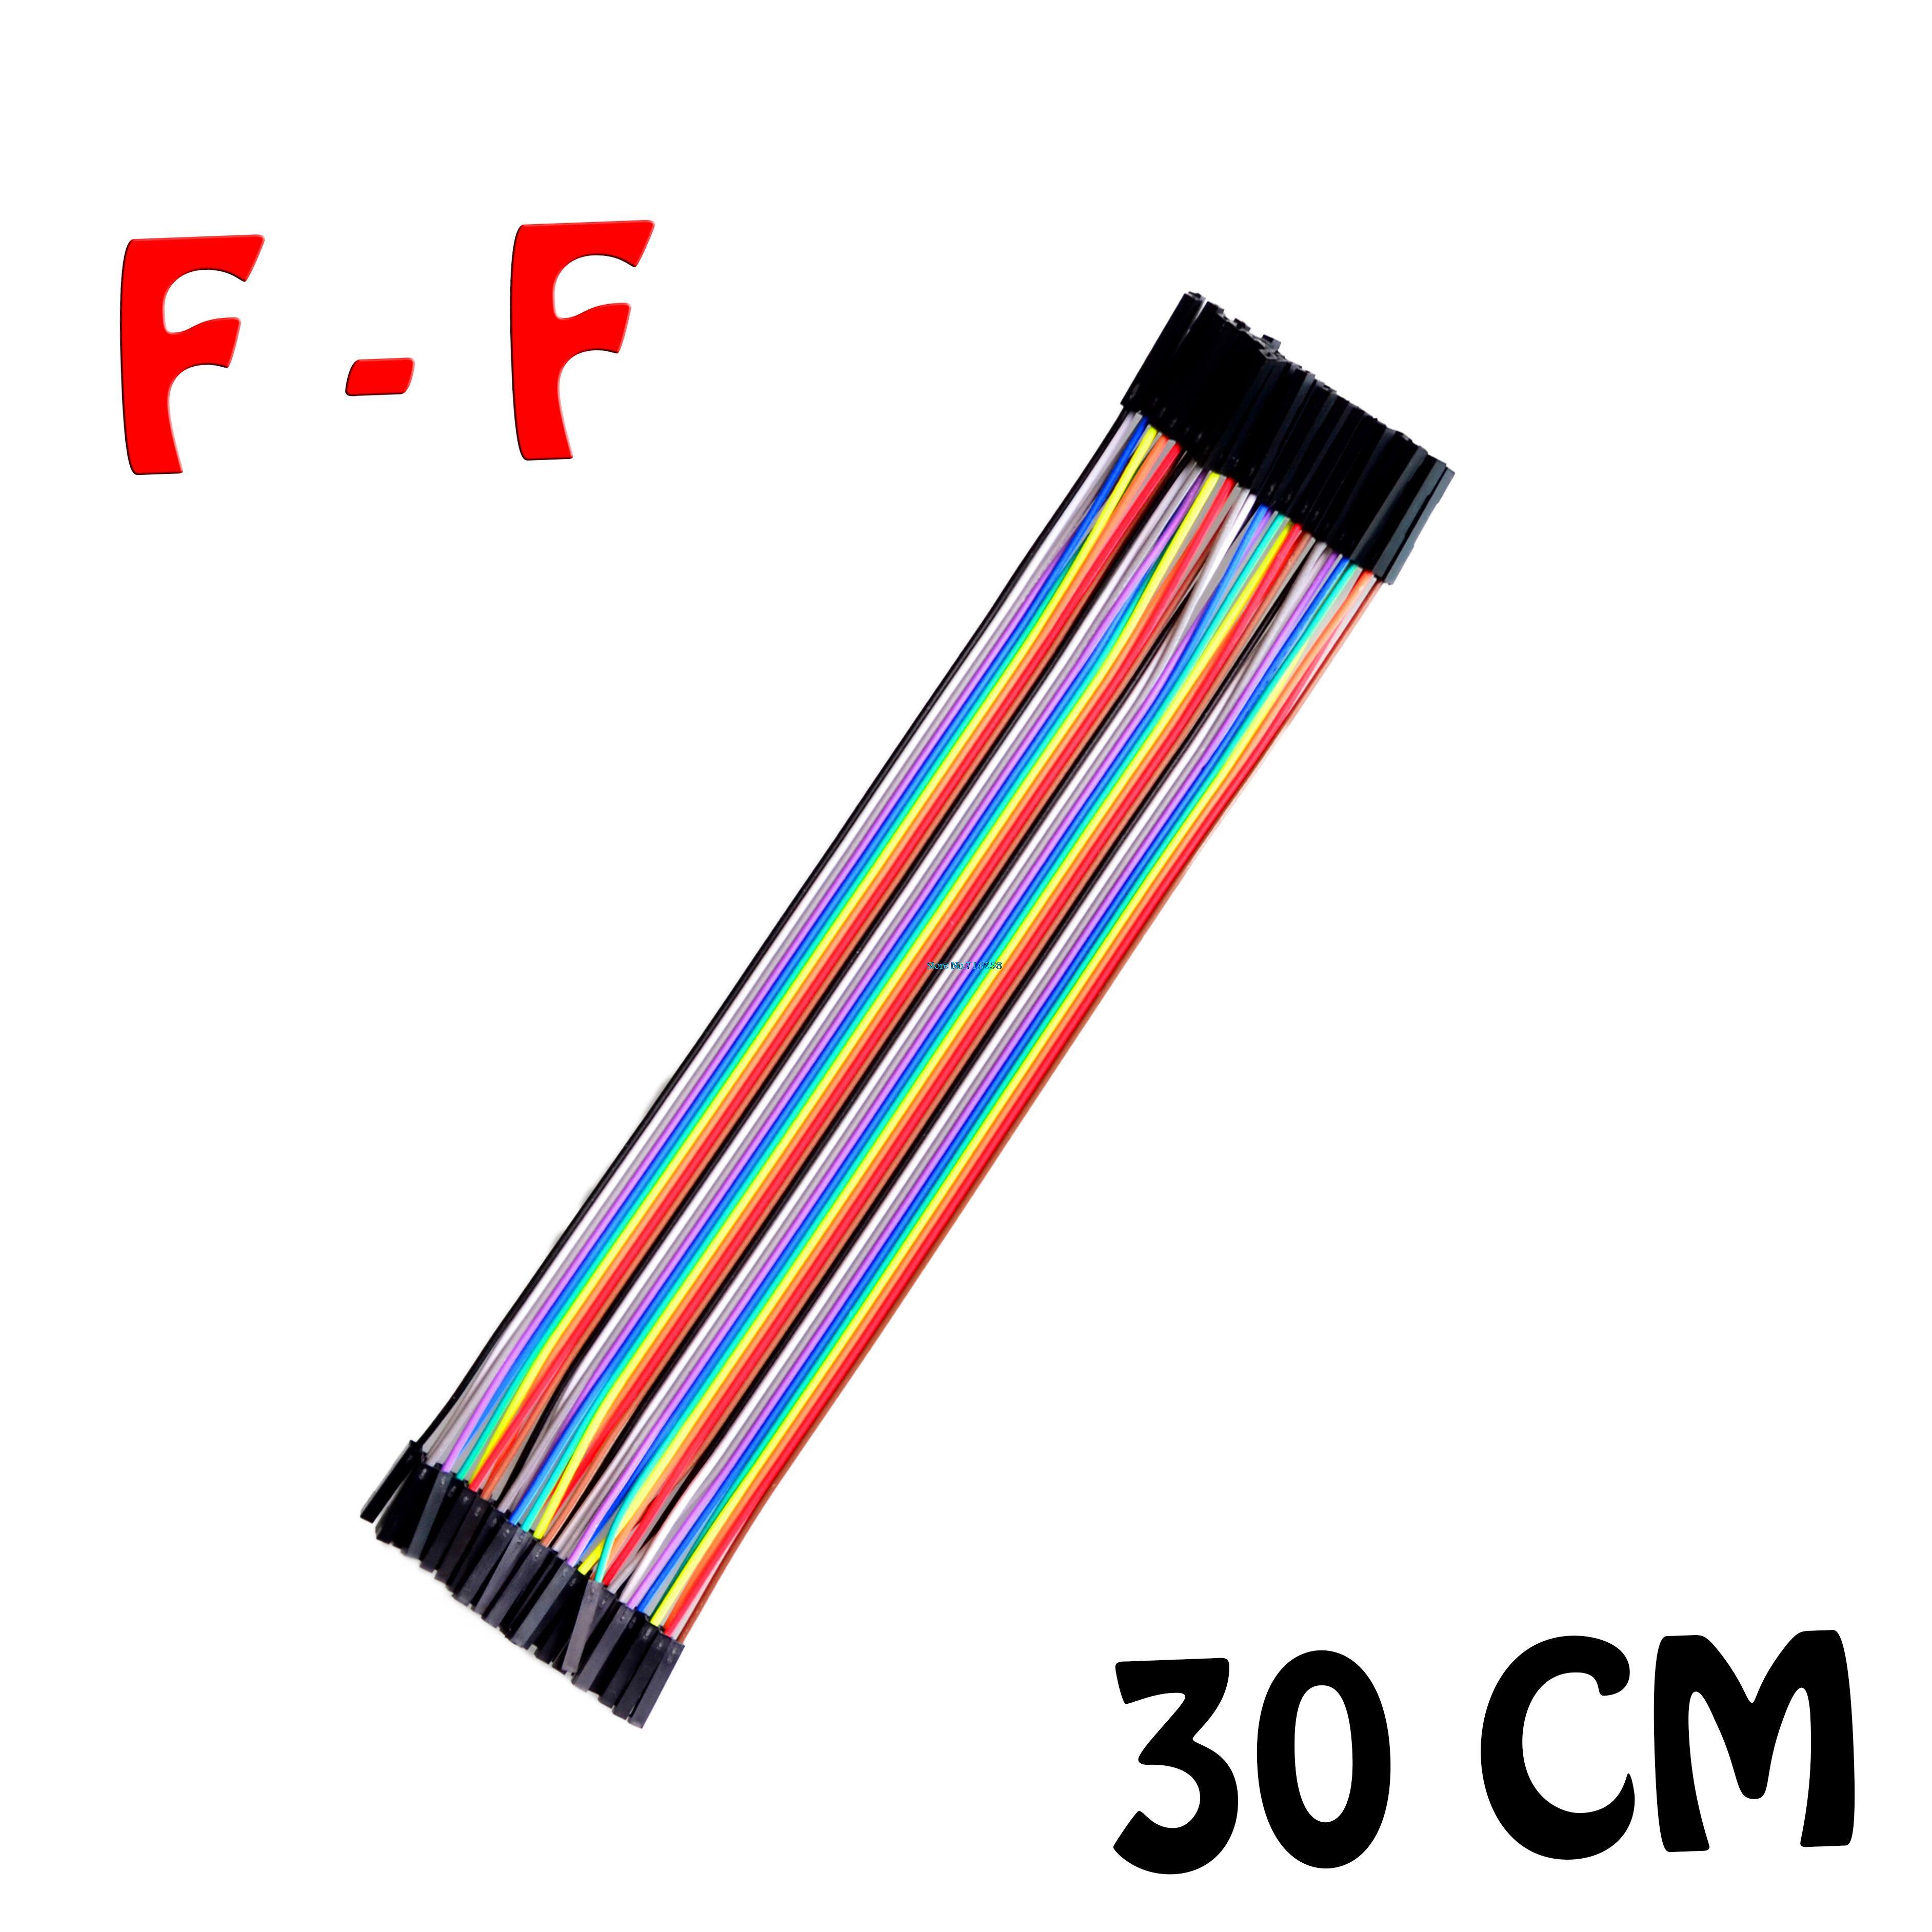 40pcs/lot 30cm 1p-1p Famale to Female jumper wire Dupont cable  Breadboard